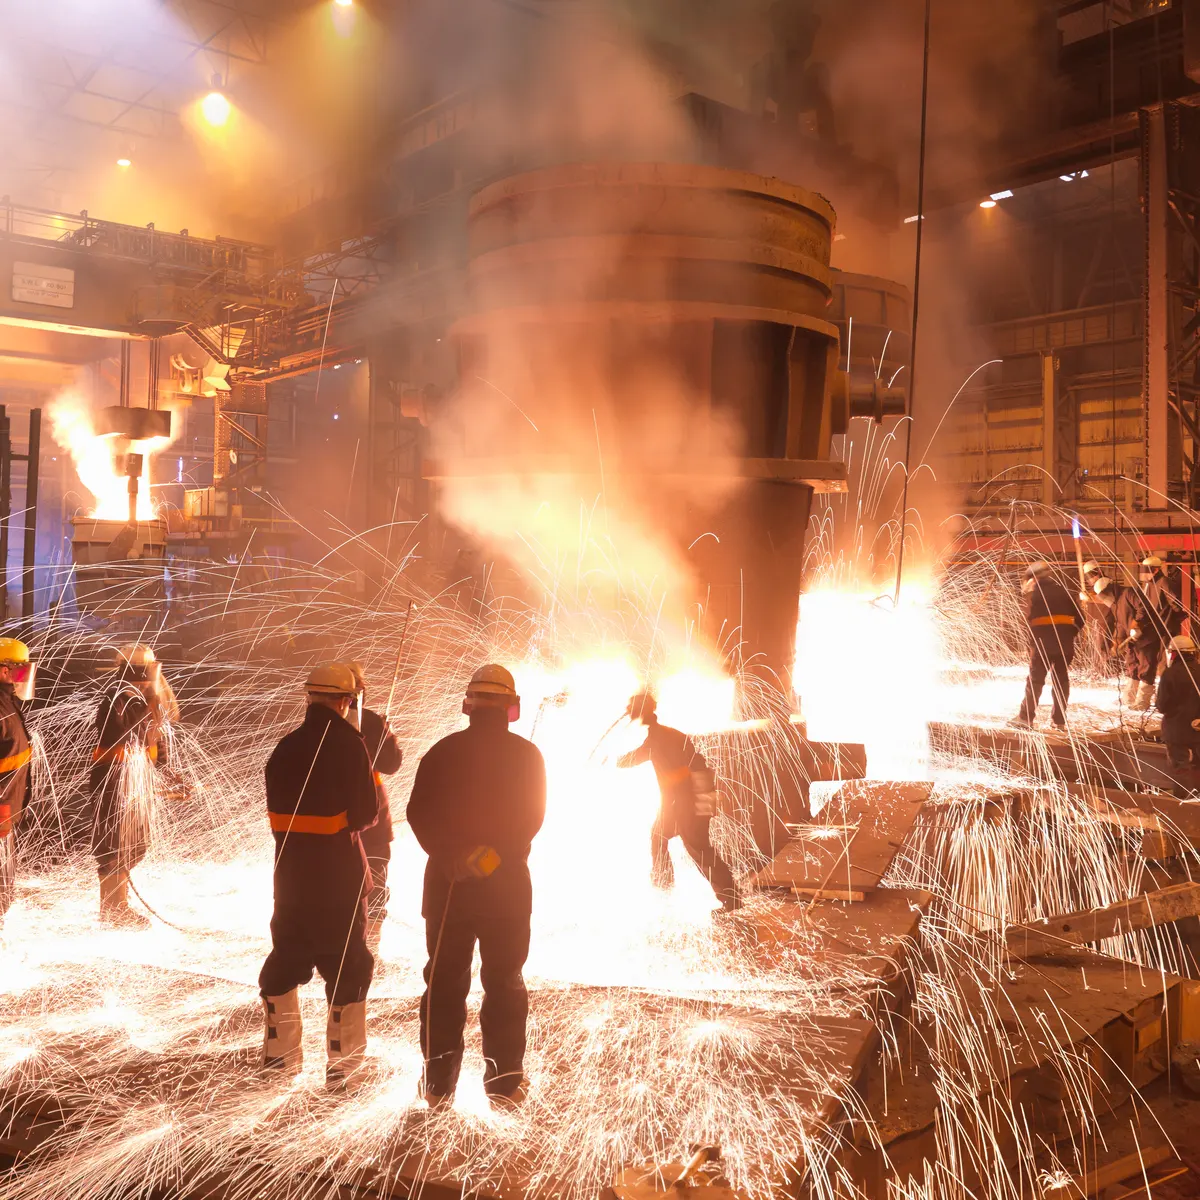 Challenges for UK's Steel Industry and Security